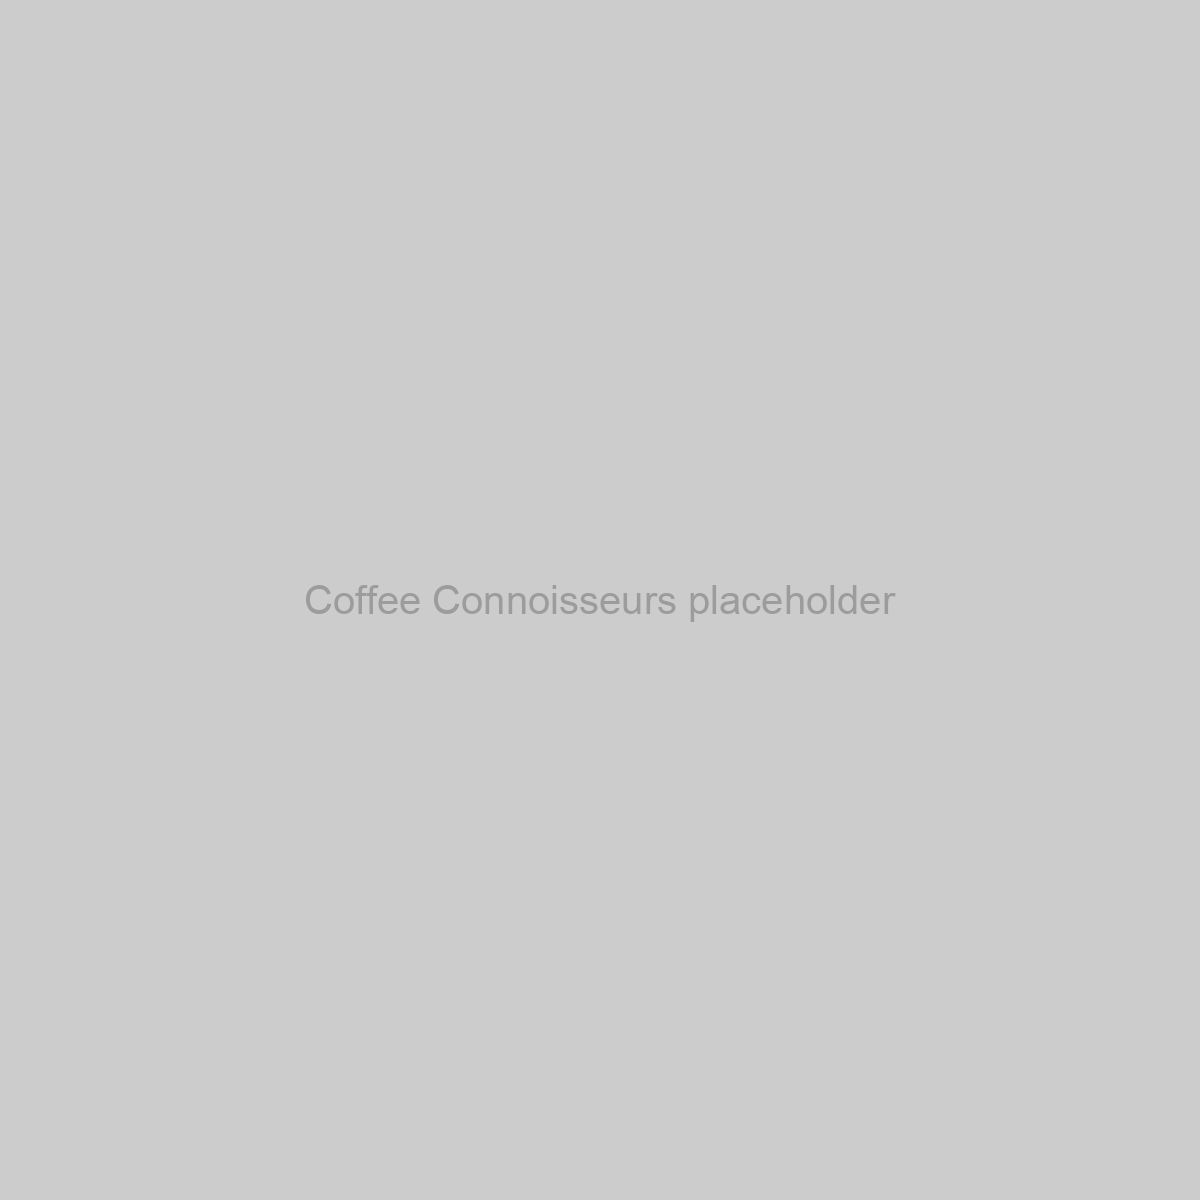 Coffee Connoisseurs Placeholder Image